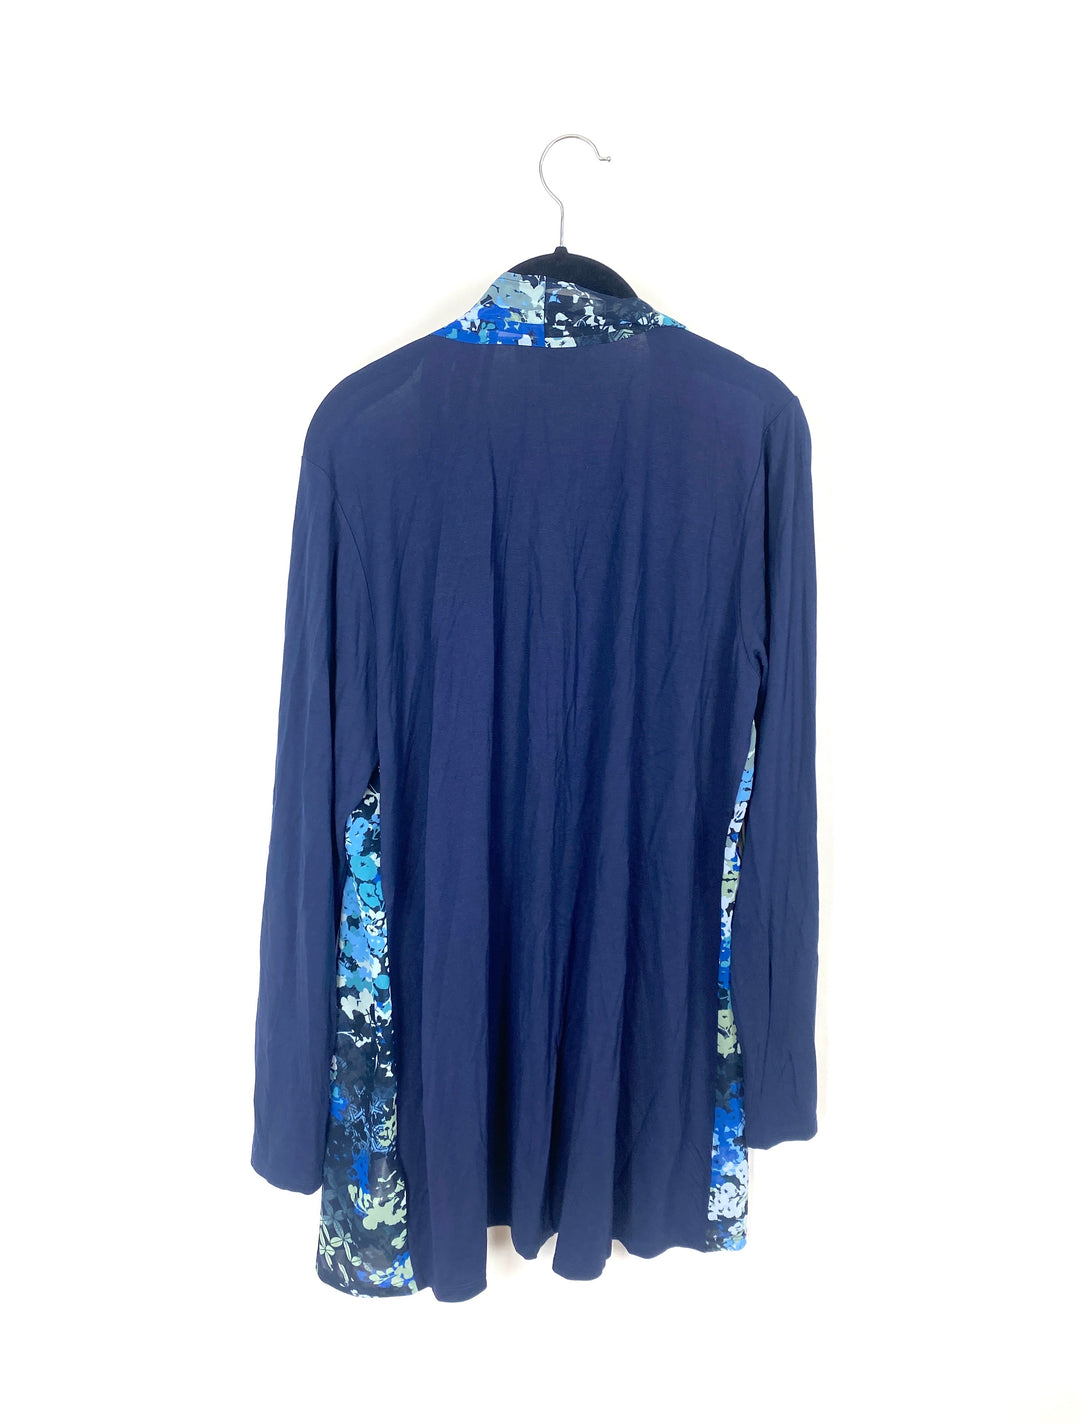 Navy Blue Cardigan with Sheer Blue Accents - Medium/ Large